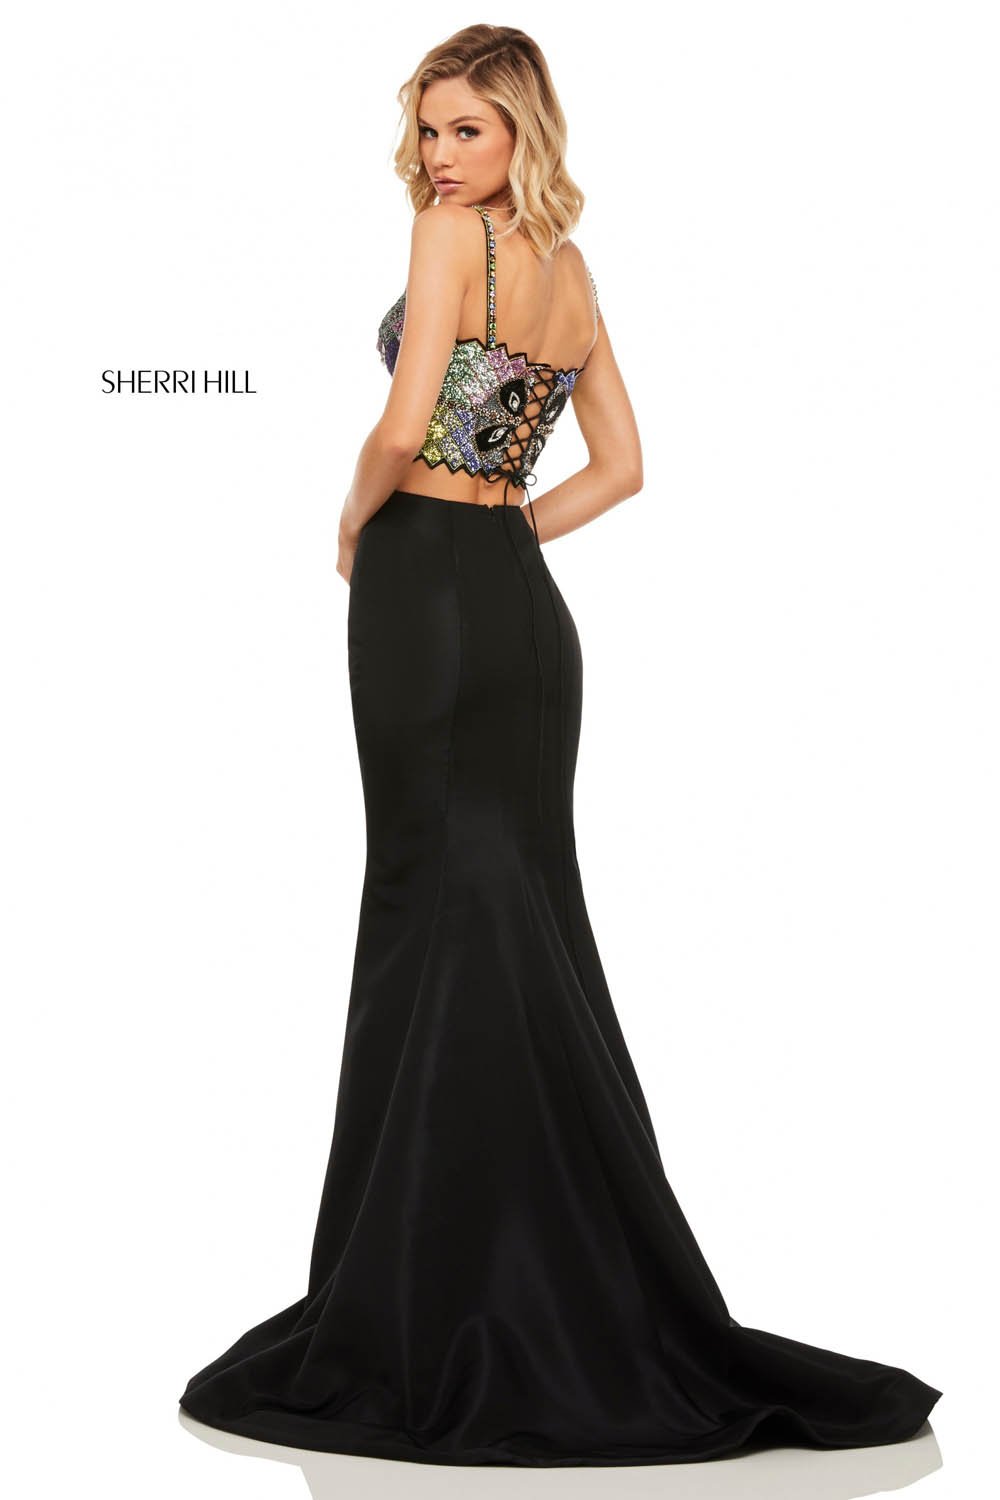 Sherri Hill 52466 dress images in these colors: Black Pink Mulighti.